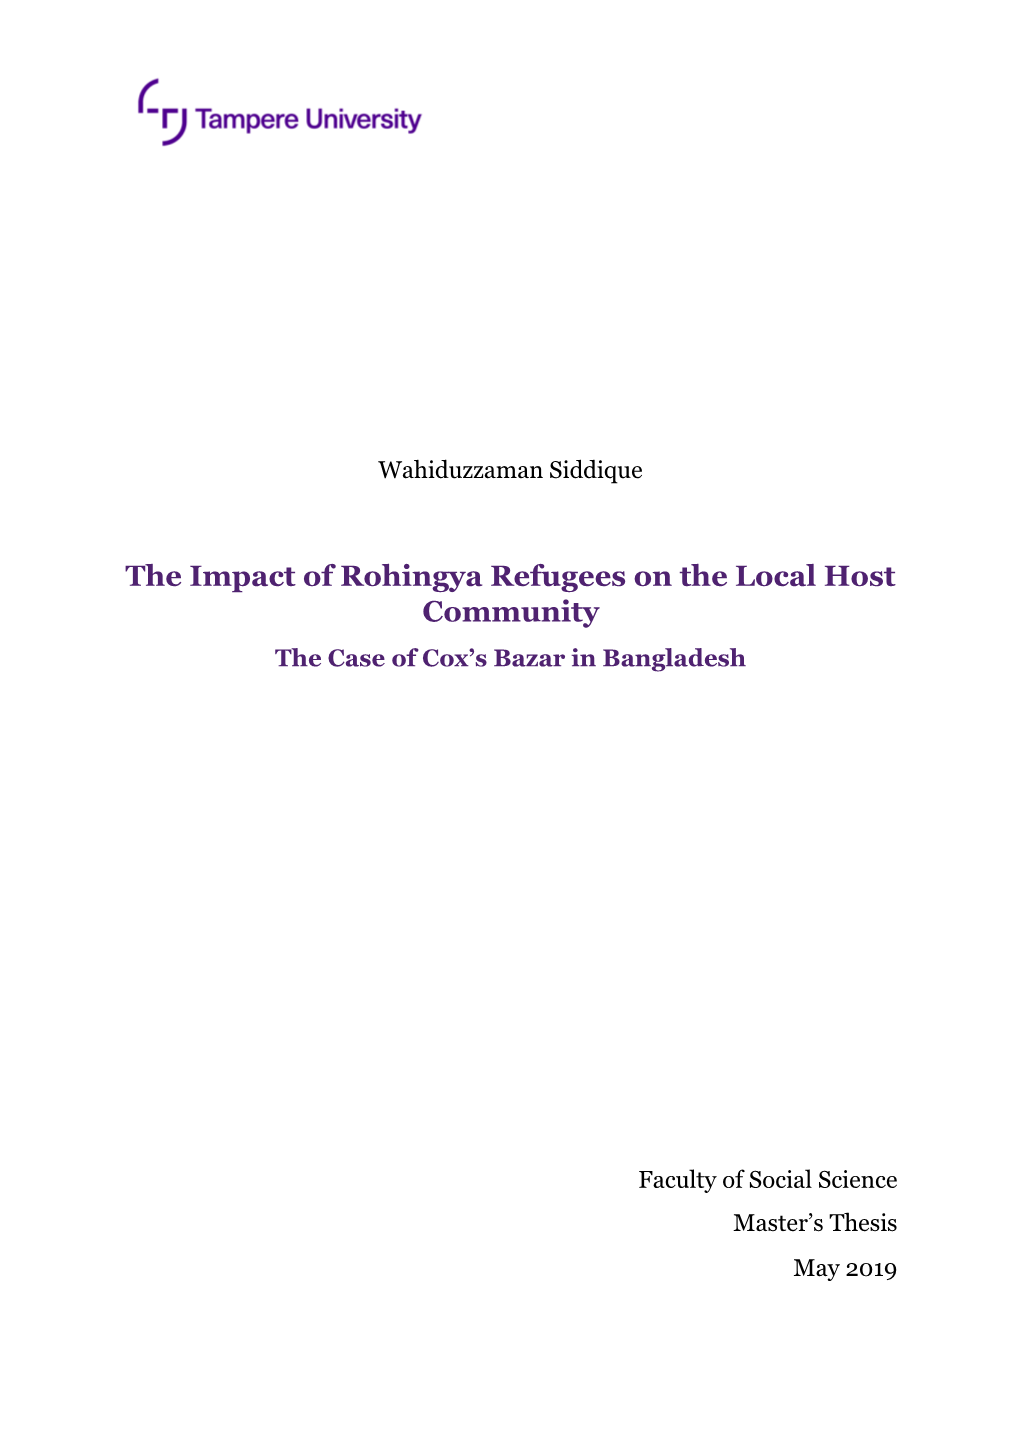 The Impact of Rohingya Refugees on the Local Host Community the Case of Cox’S Bazar in Bangladesh